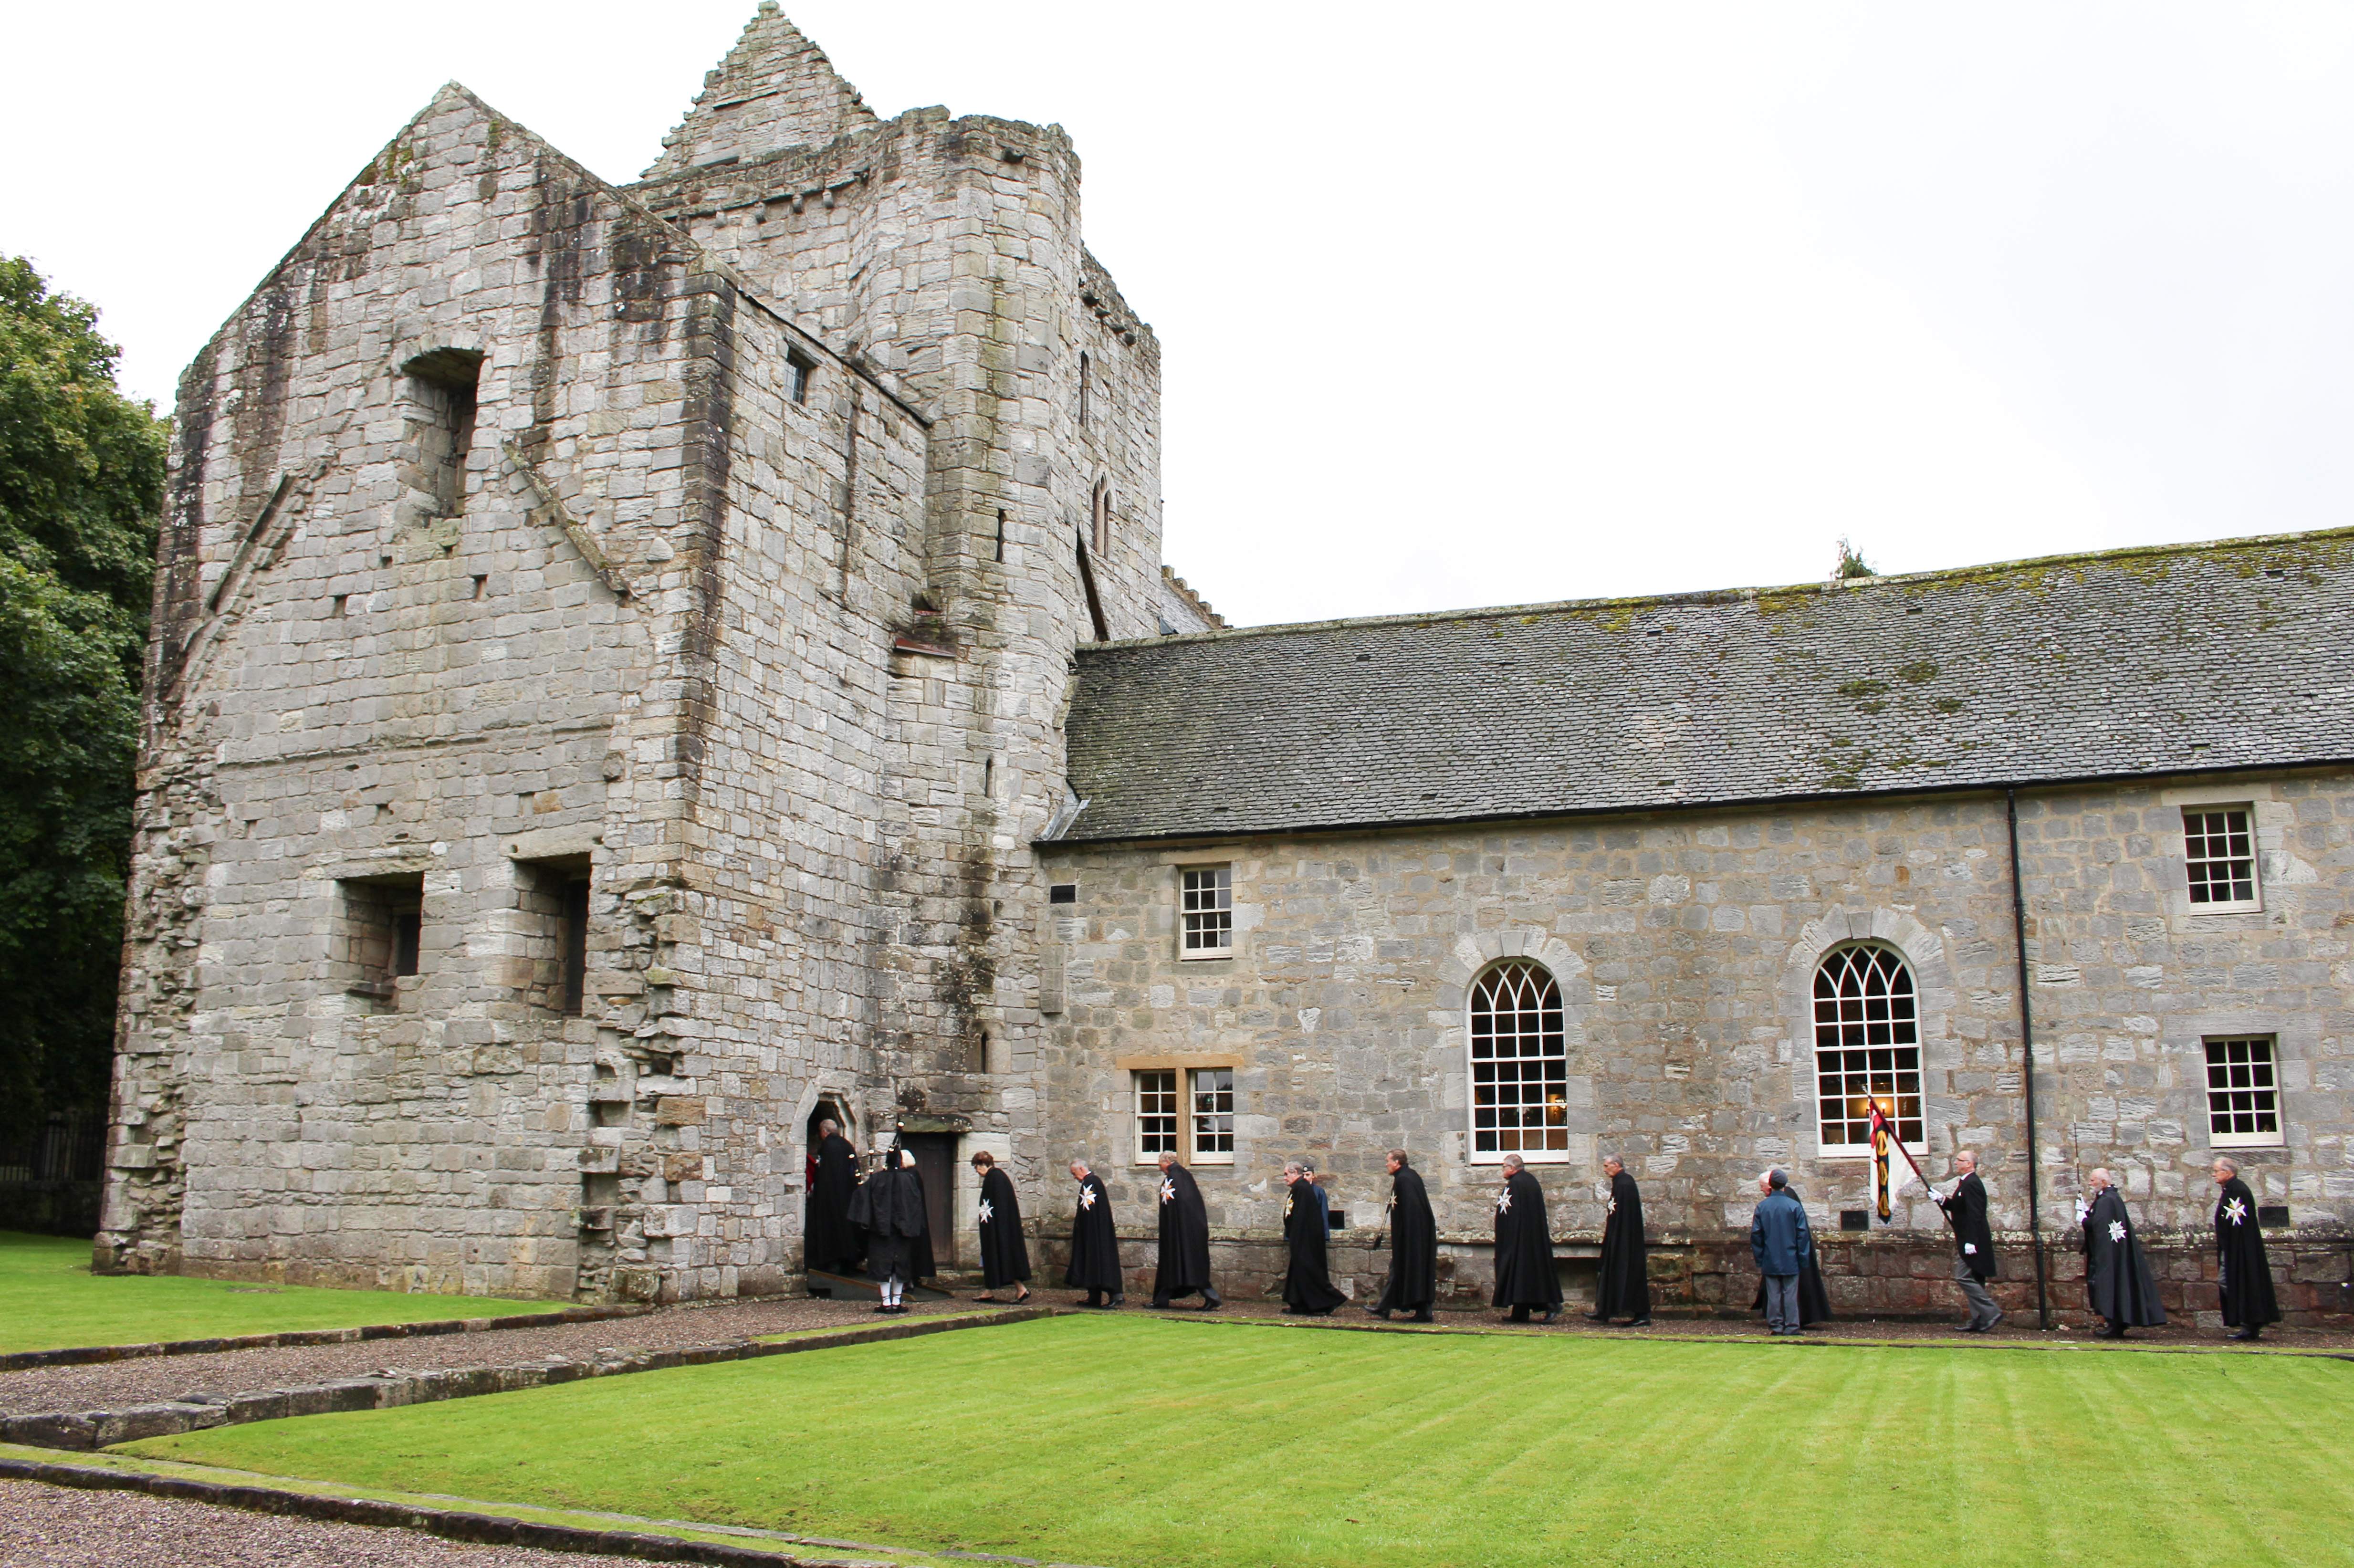 Photograph of a line of people walking into the Torphichen Preceptory